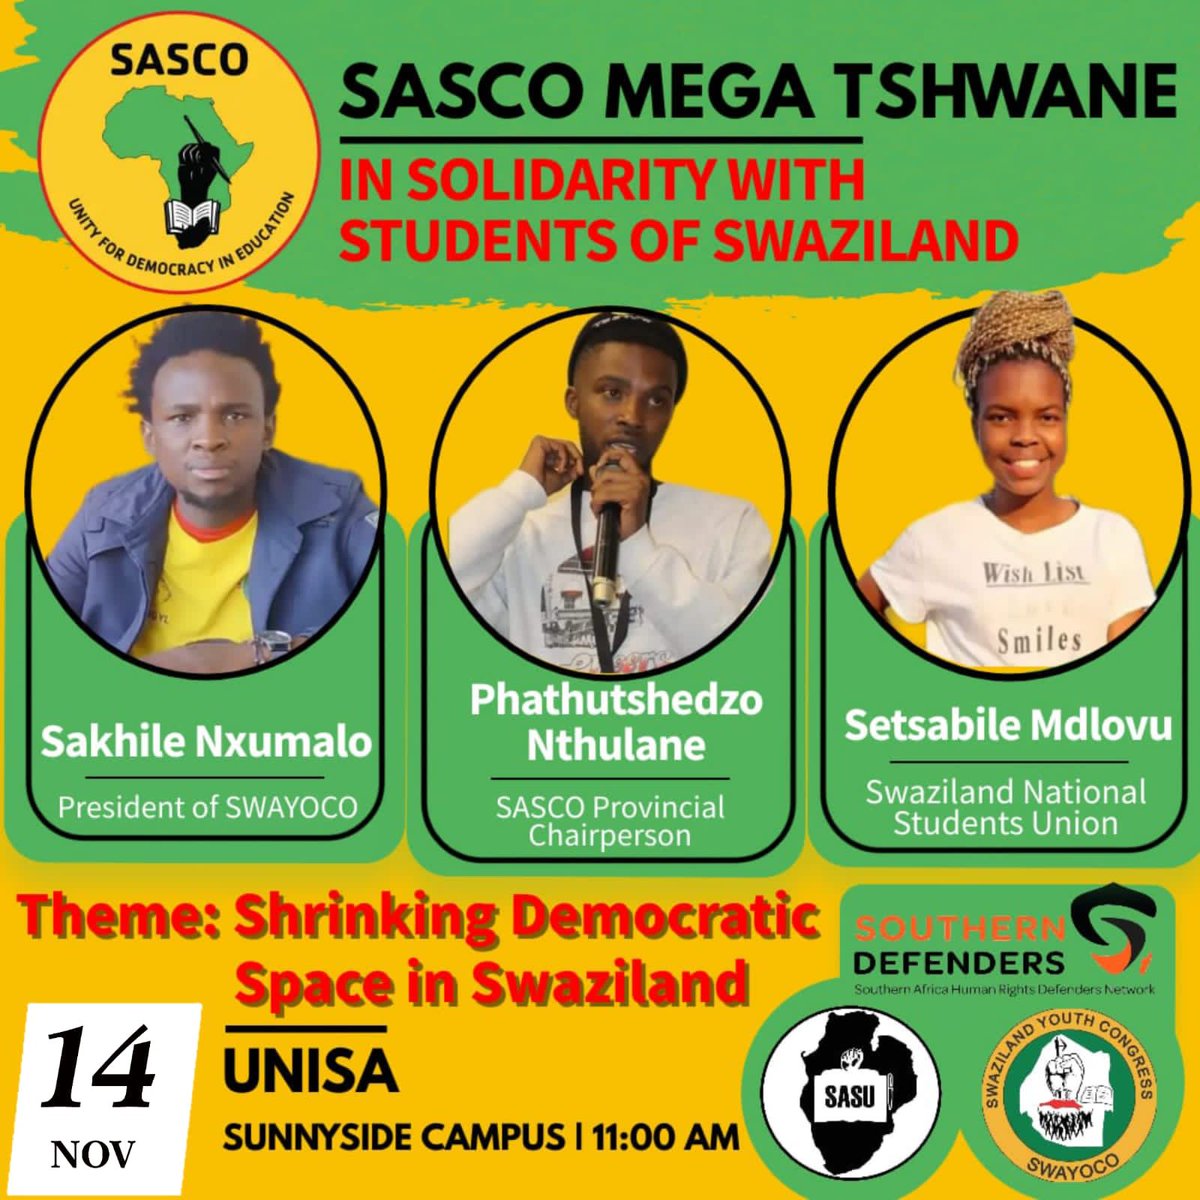 The struggle is cemented by solidarity. People to people solidarity will bring the development and security the @SADC_News region envisages. Our freedom will not be adequate if other nations in the region still face authoritarianism. @SNUS_Swazi @SASCO_Jikelele @SASUnion @saih